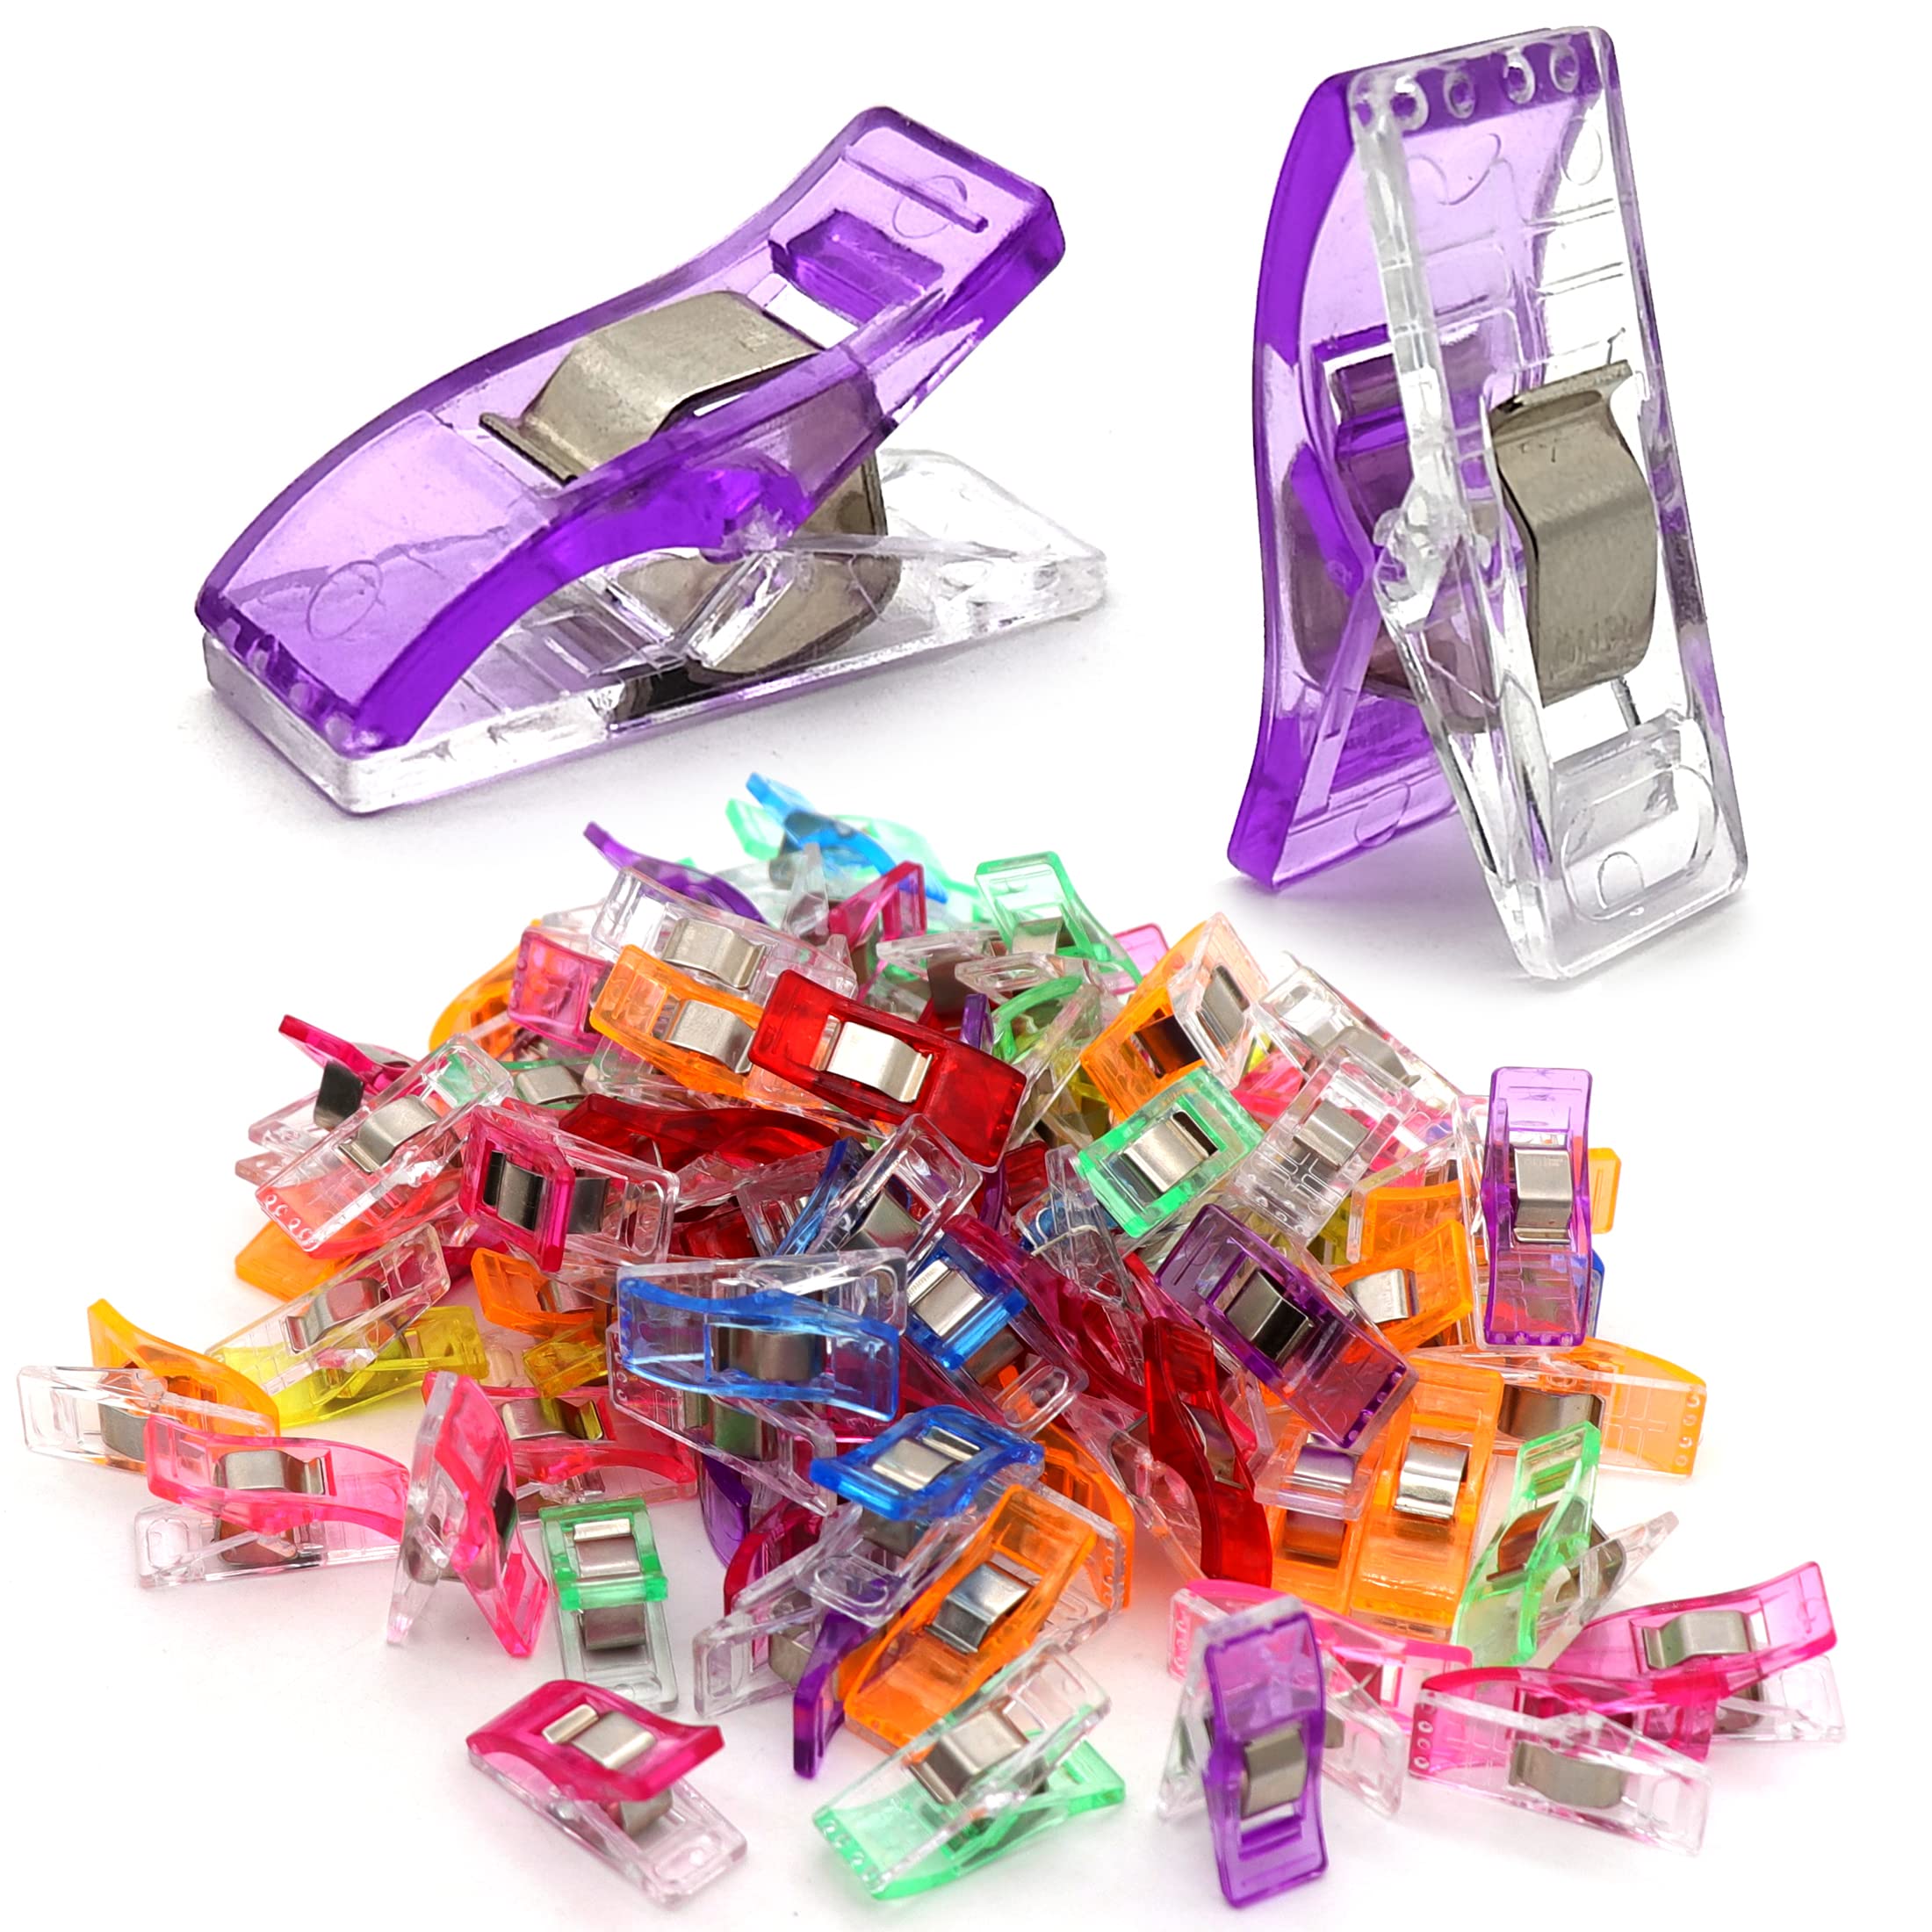 BamLue 120 Pieces Sewing Clips Multi-Color for Sewing Craft Clamps Crafting Crochet and Knitting All Purpose Clips for Quilting Binding Clips Fabric